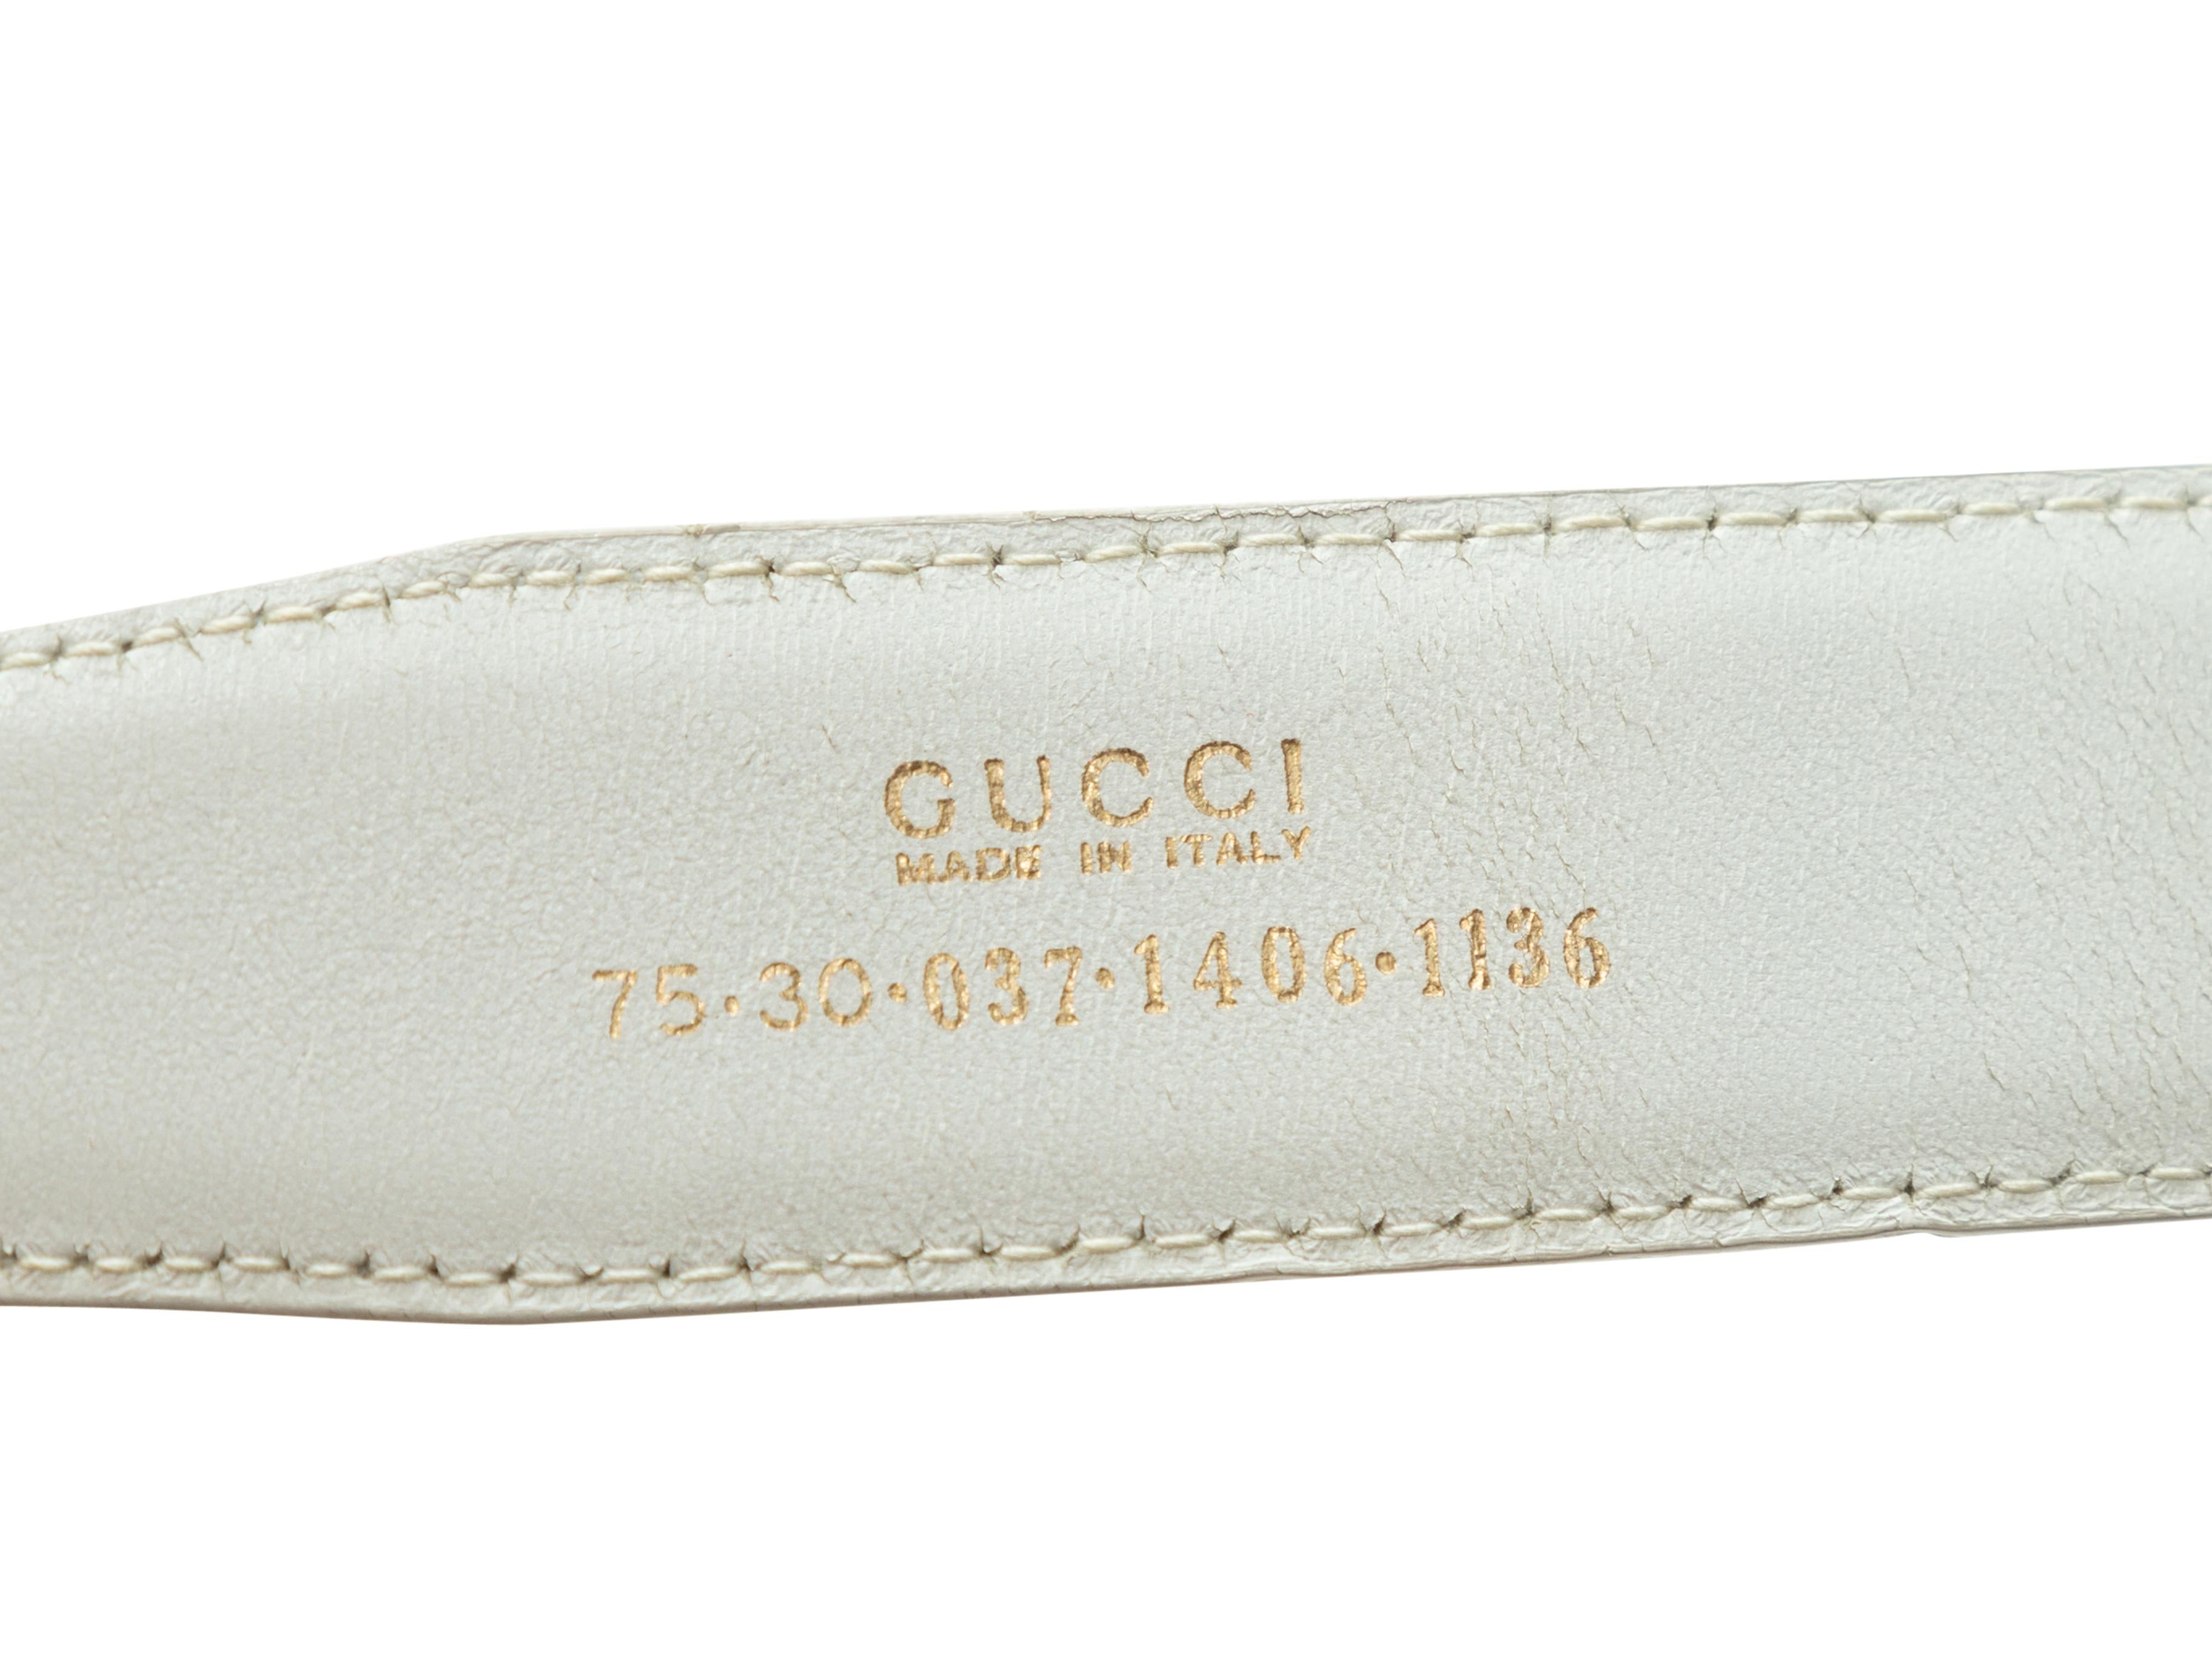 Product Details: White leather belt by Gucci. Gold-tone buckle closure. 34